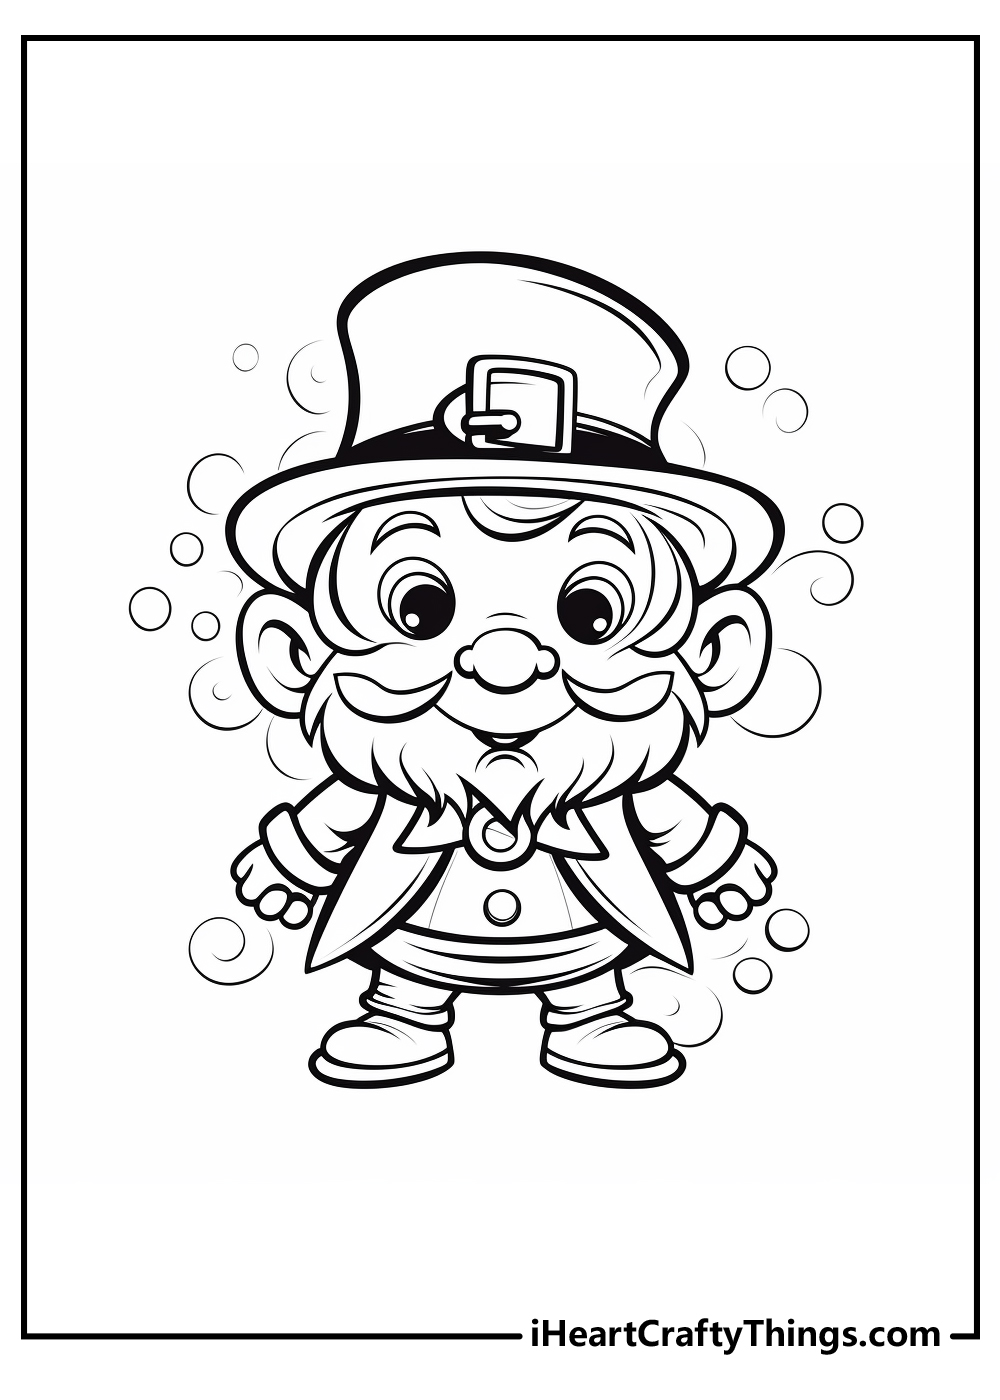 Leprechaun coloring pages updated